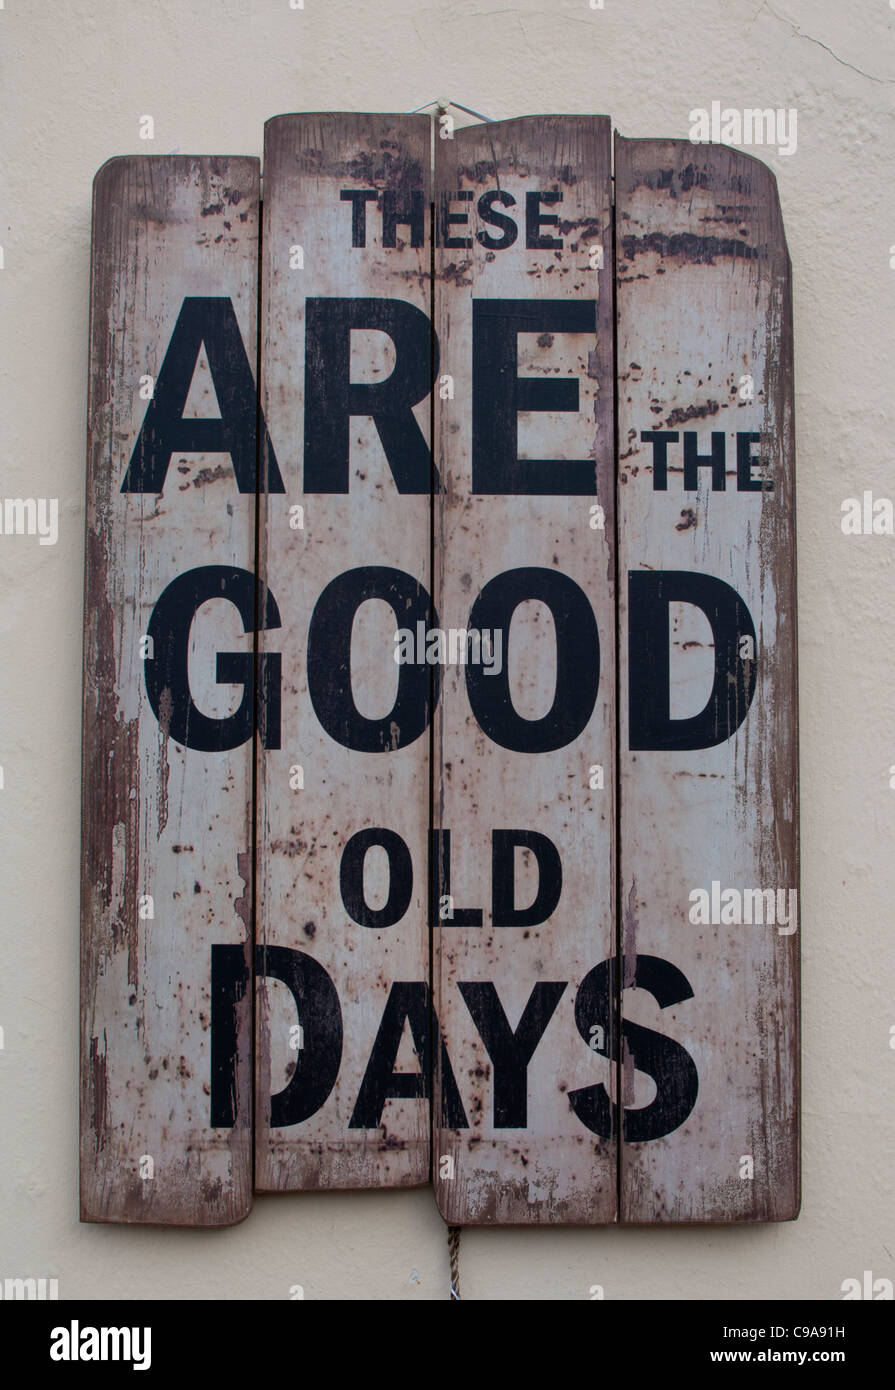 THESE ARE THE GOOD OLD DAYS sign Stock Photo